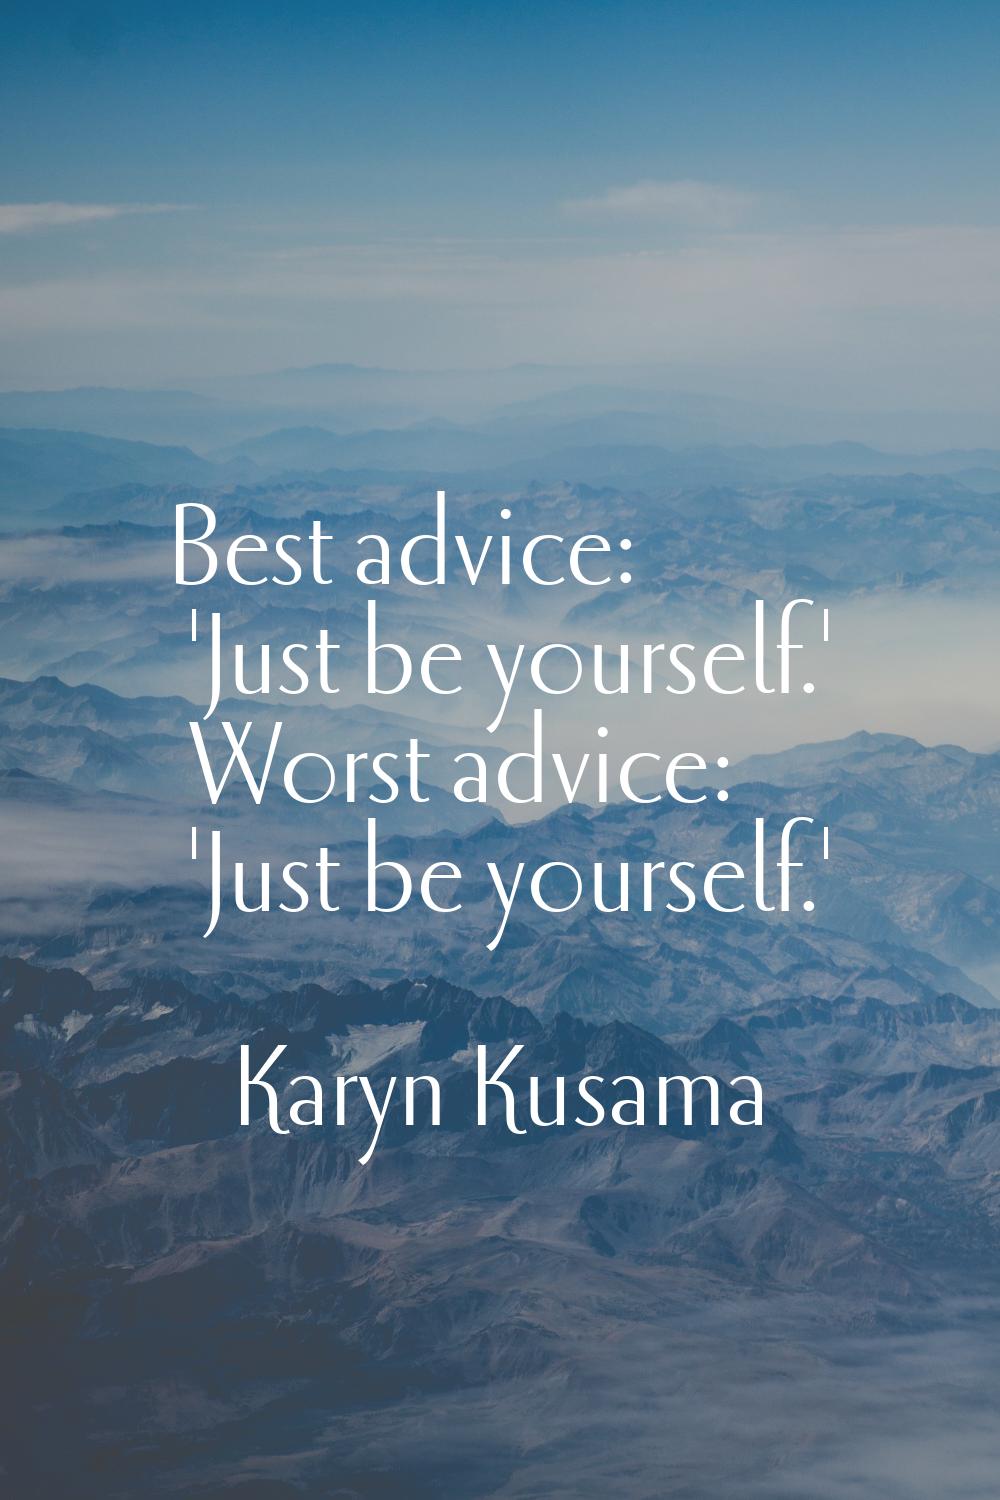 Best advice: 'Just be yourself.' Worst advice: 'Just be yourself.'